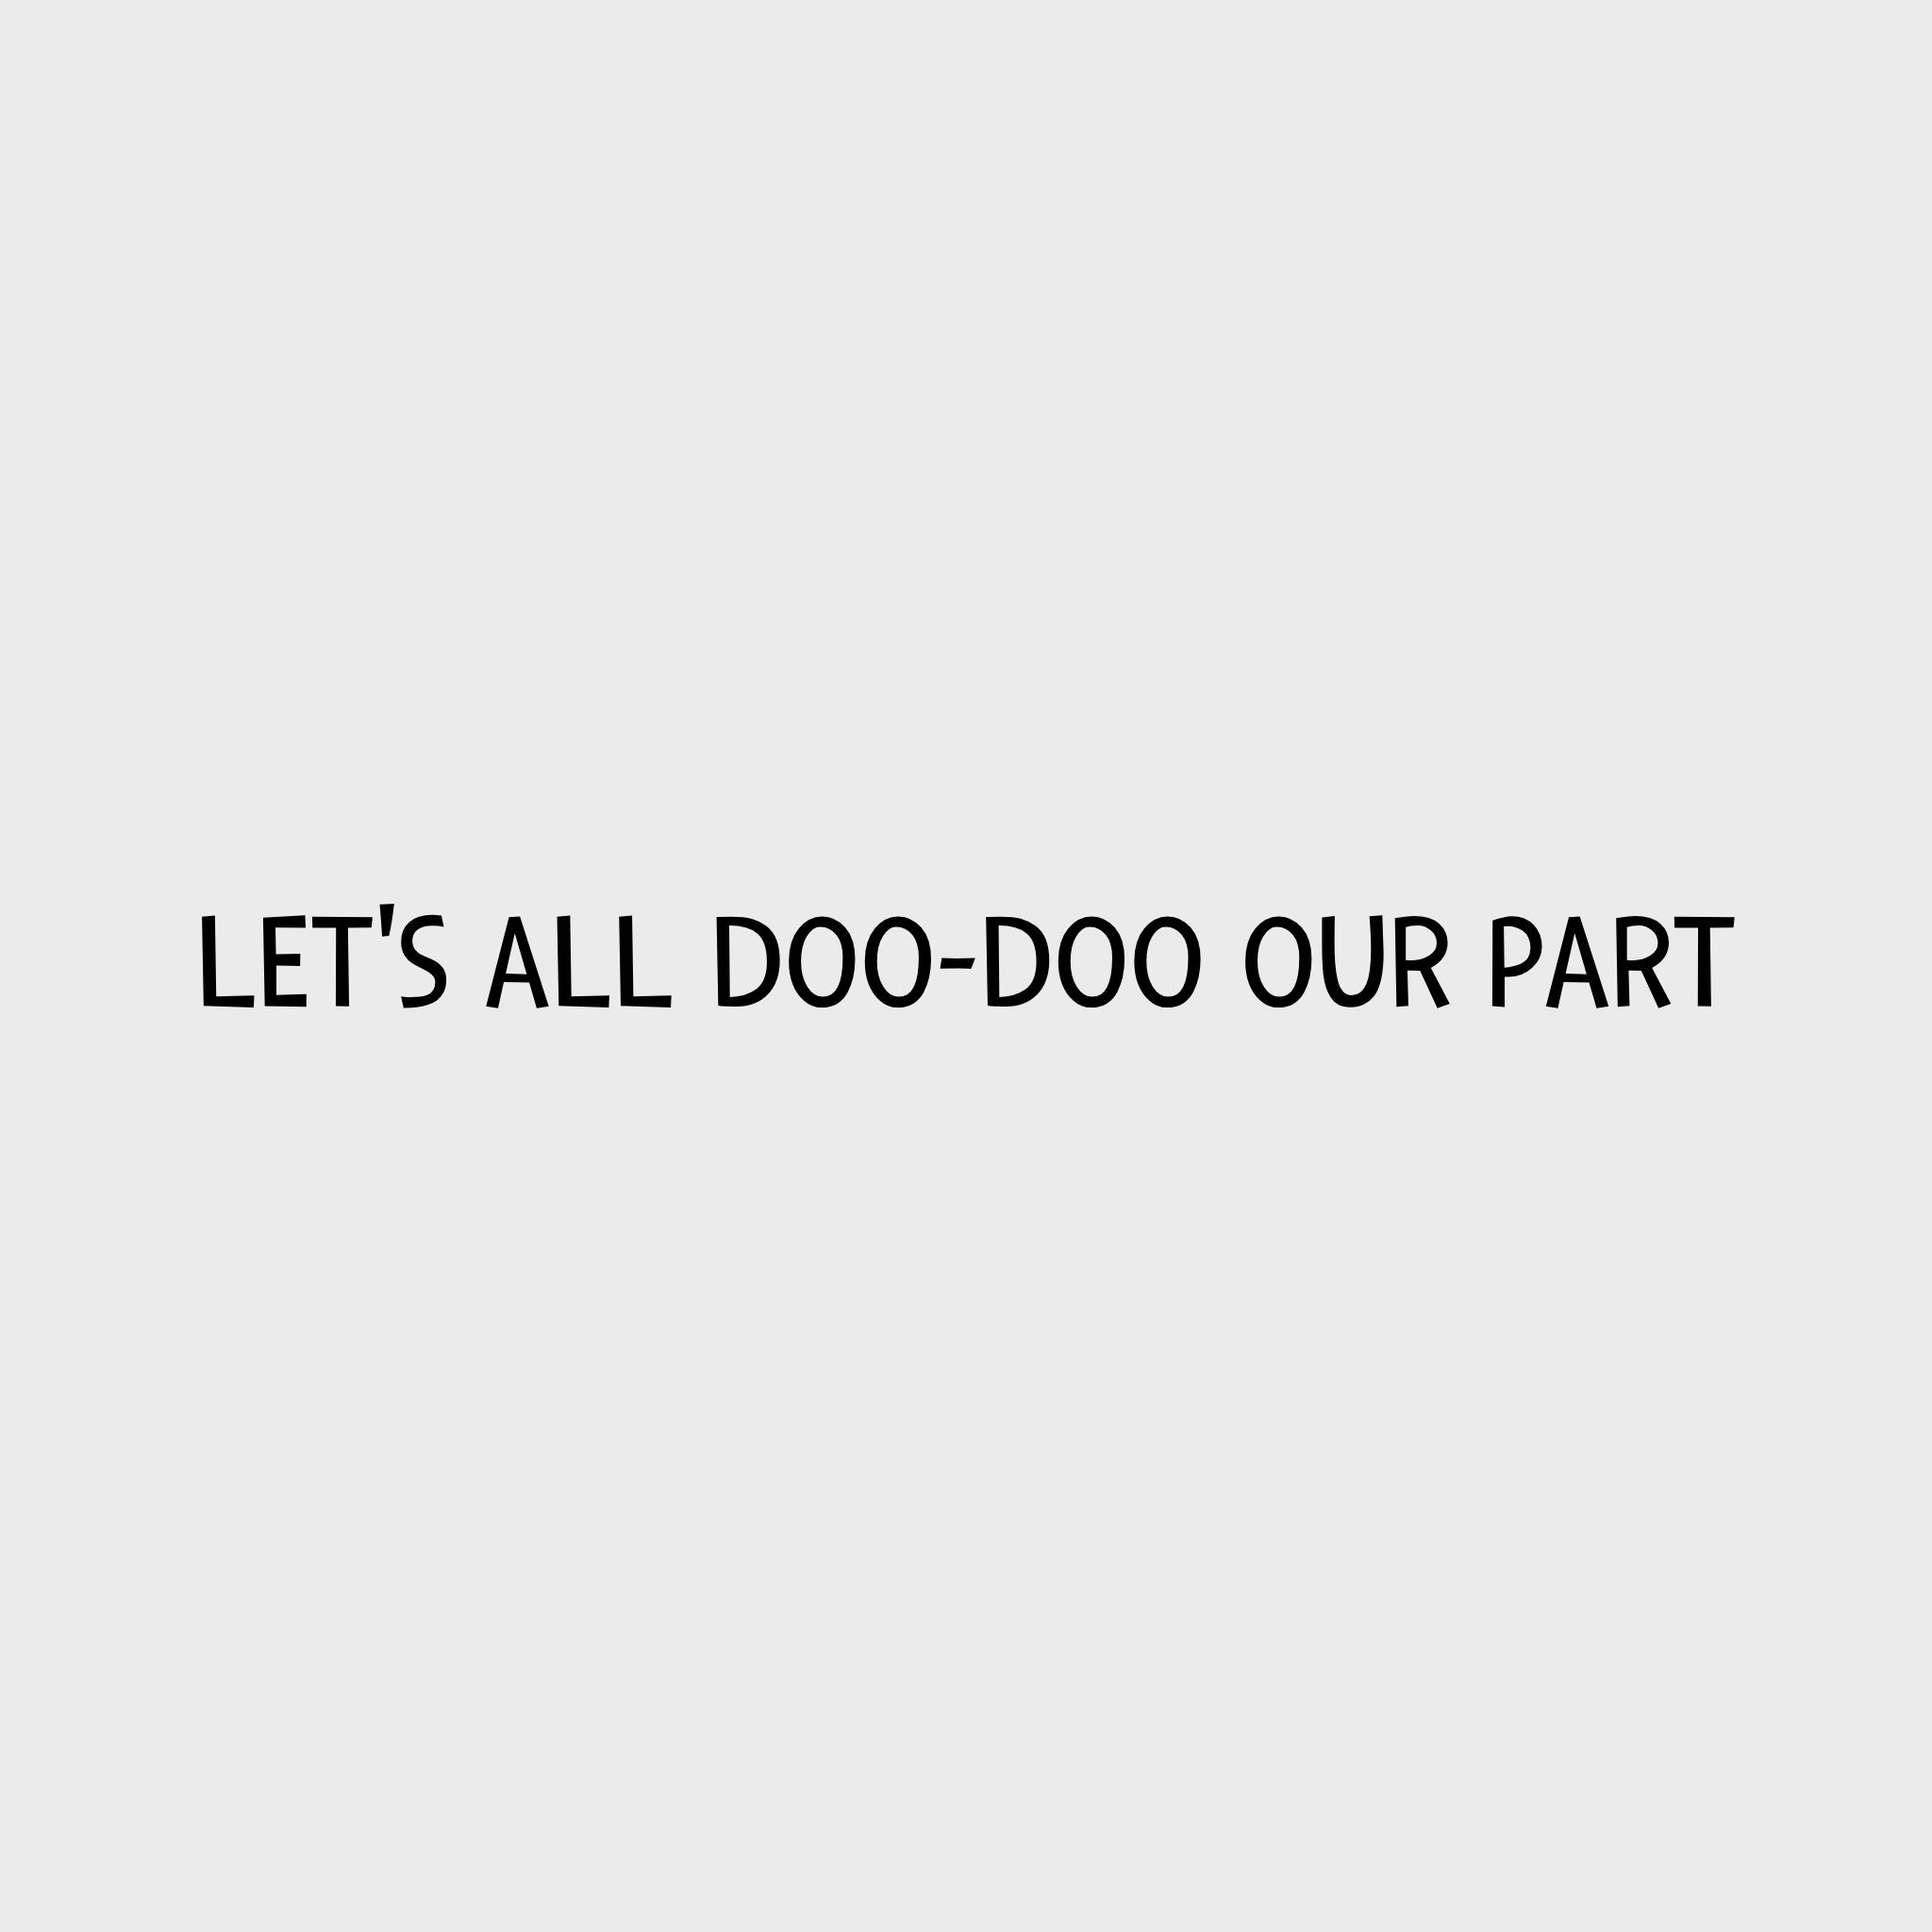 Let's All Doo-Doo Our Part